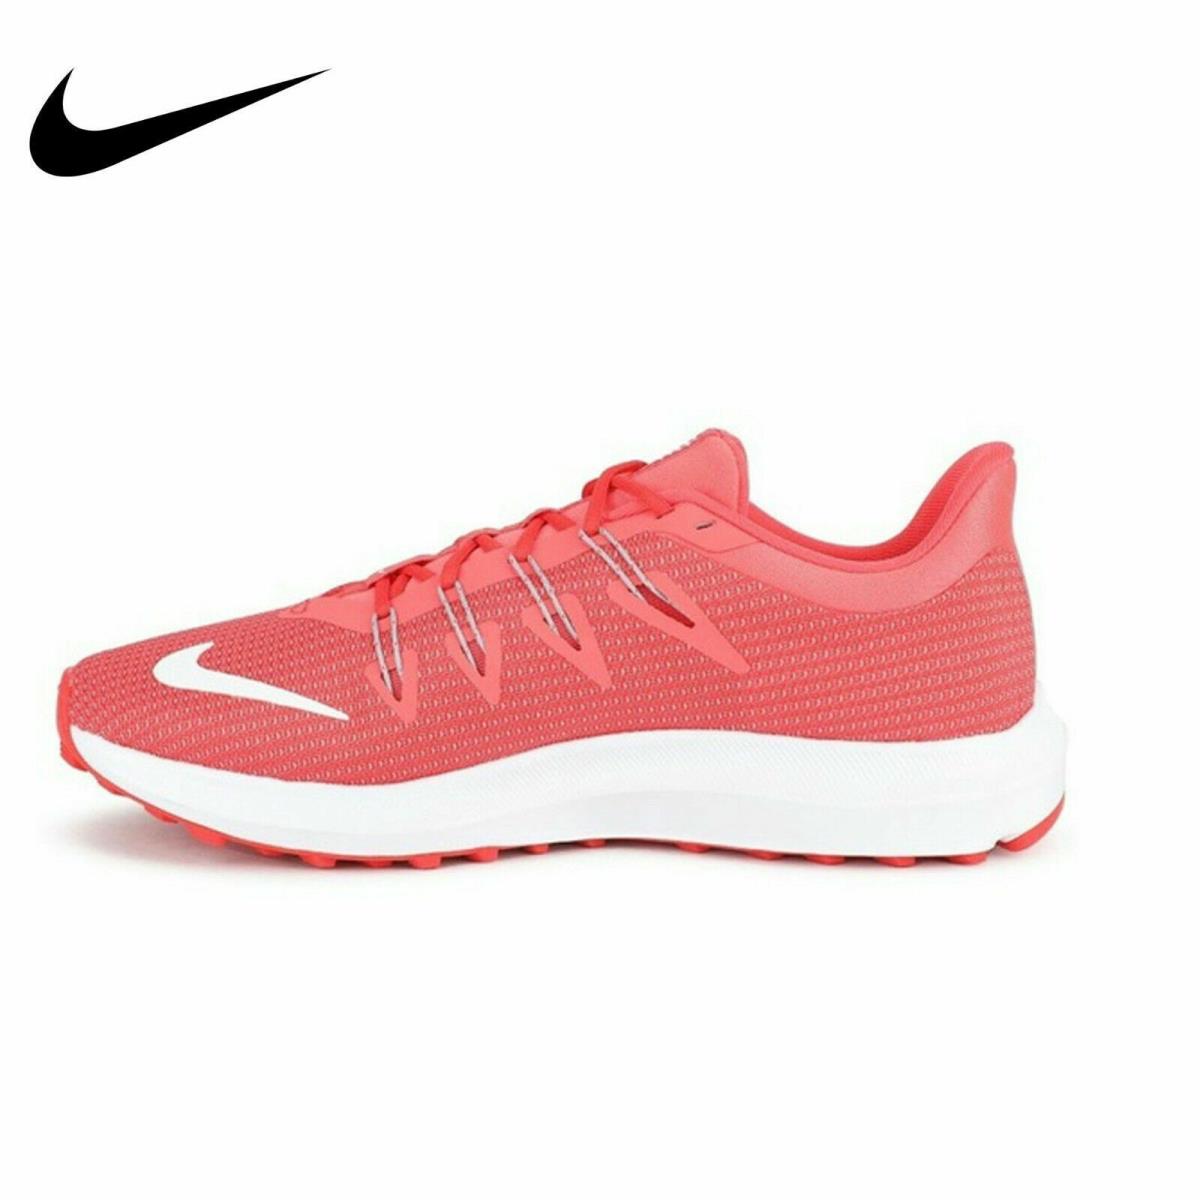 Nike shoes Quest - Red 0